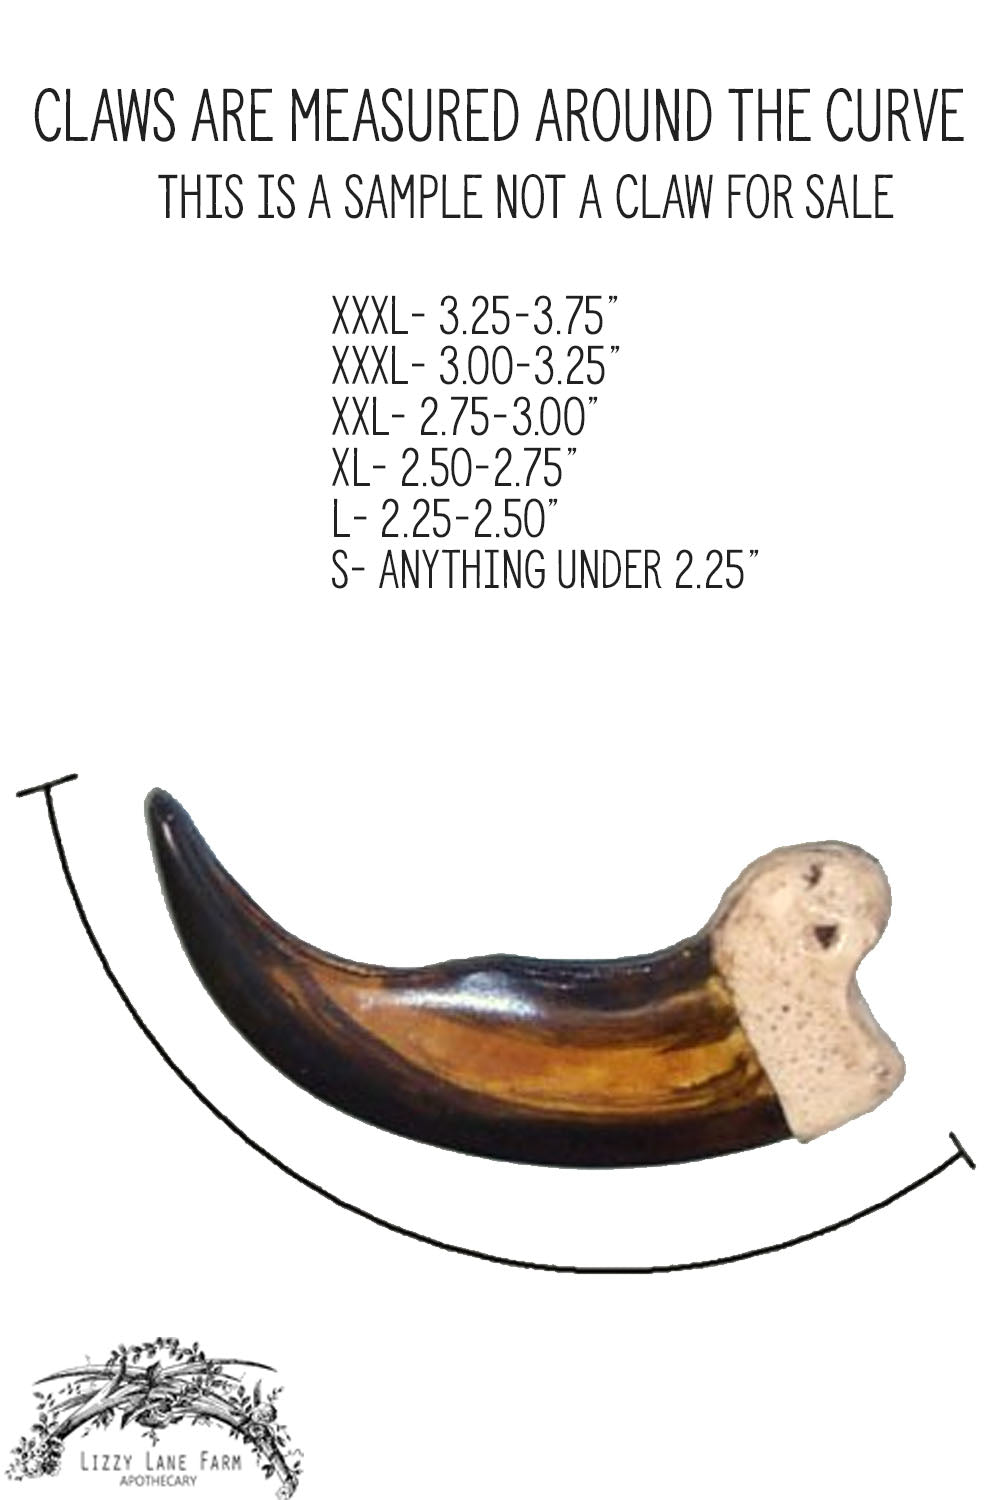 how bear claws are measured